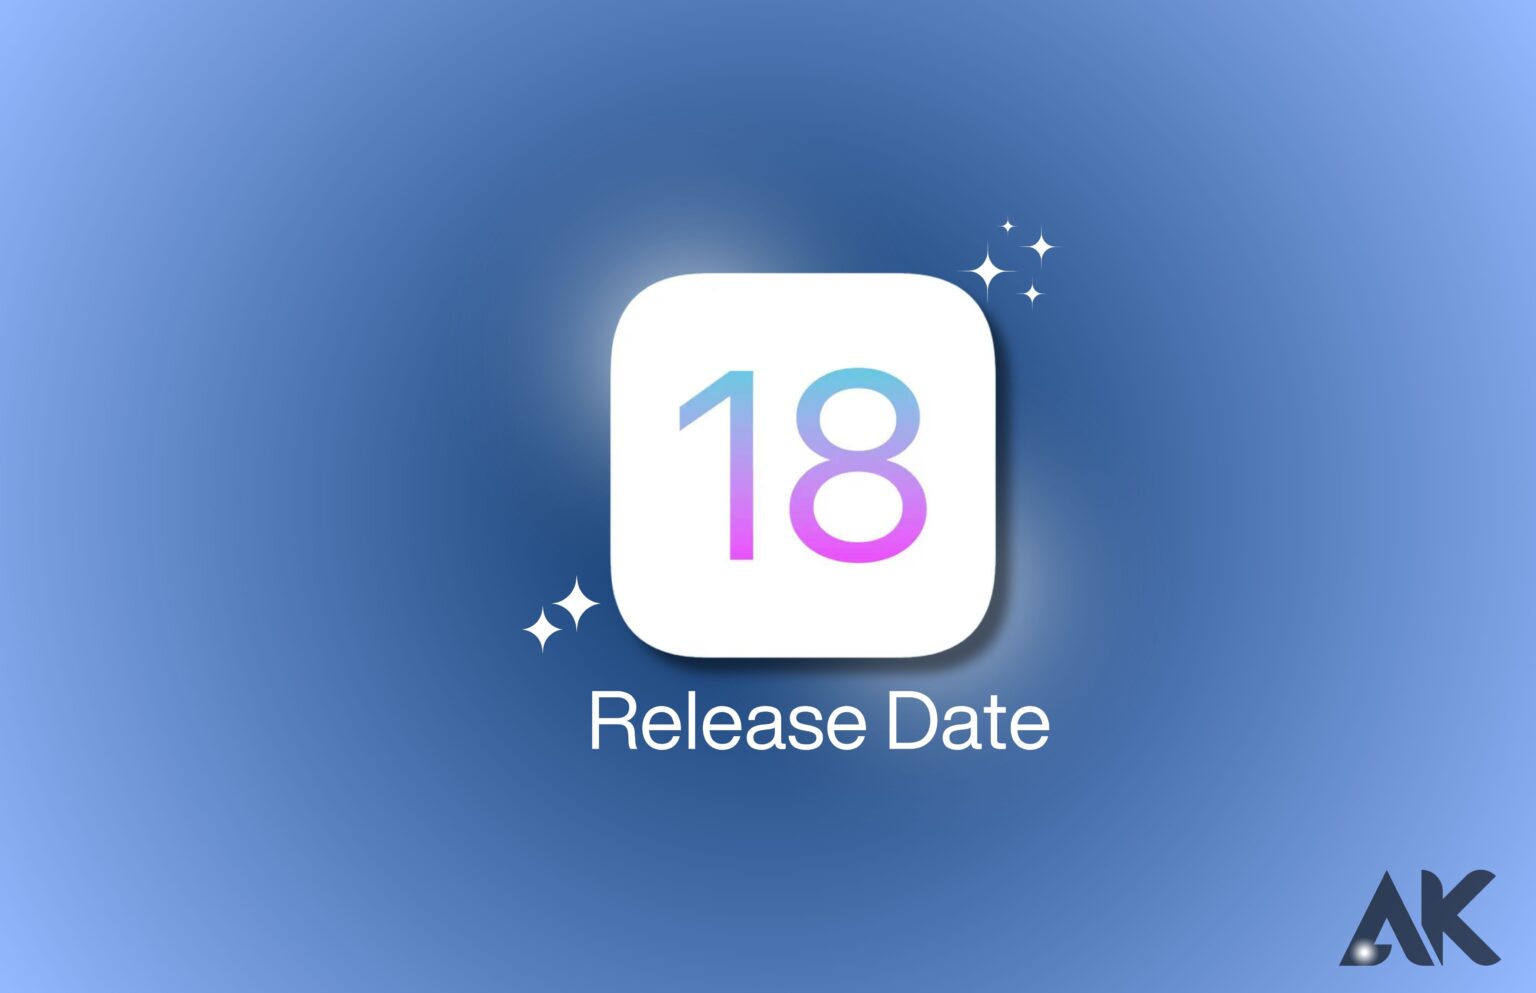 iOS 18 Release Date: When to Expect Apple's Next Mobile OS